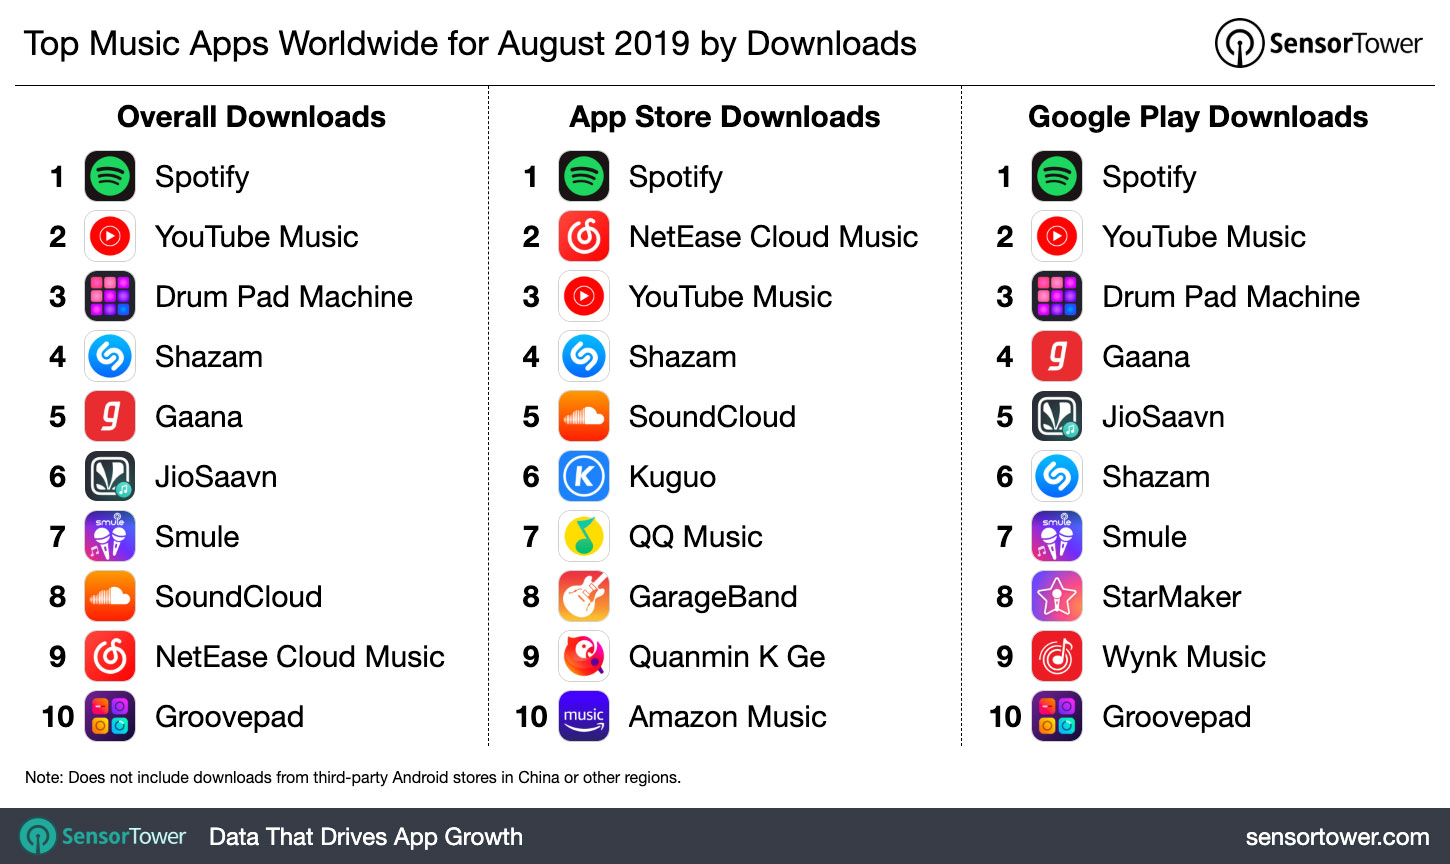 Top Music Apps Worldwide for August 2019 by Downloads